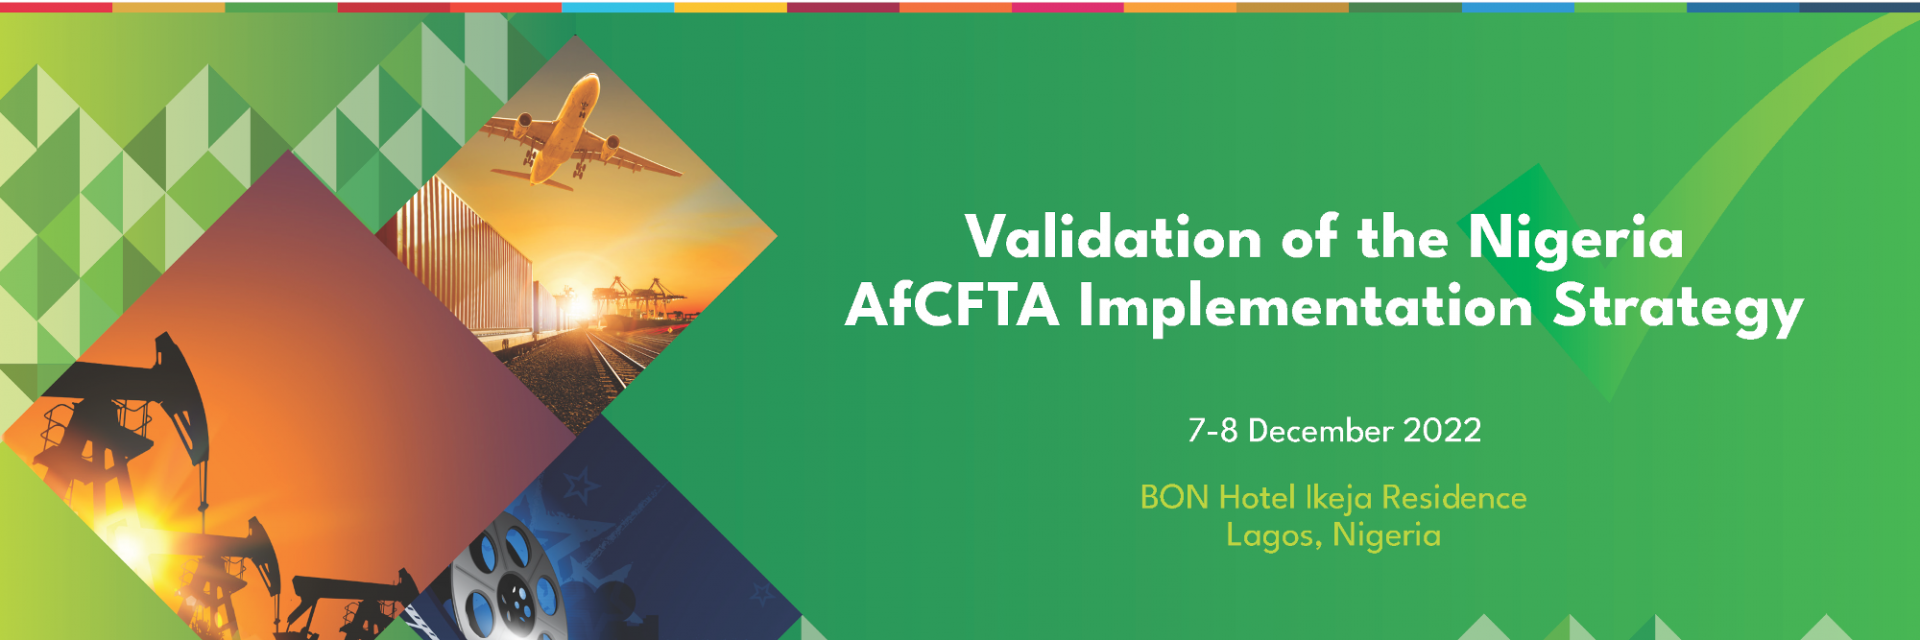 Validation session of Nigeria’s national strategy and implementation plan for the AFCFTA